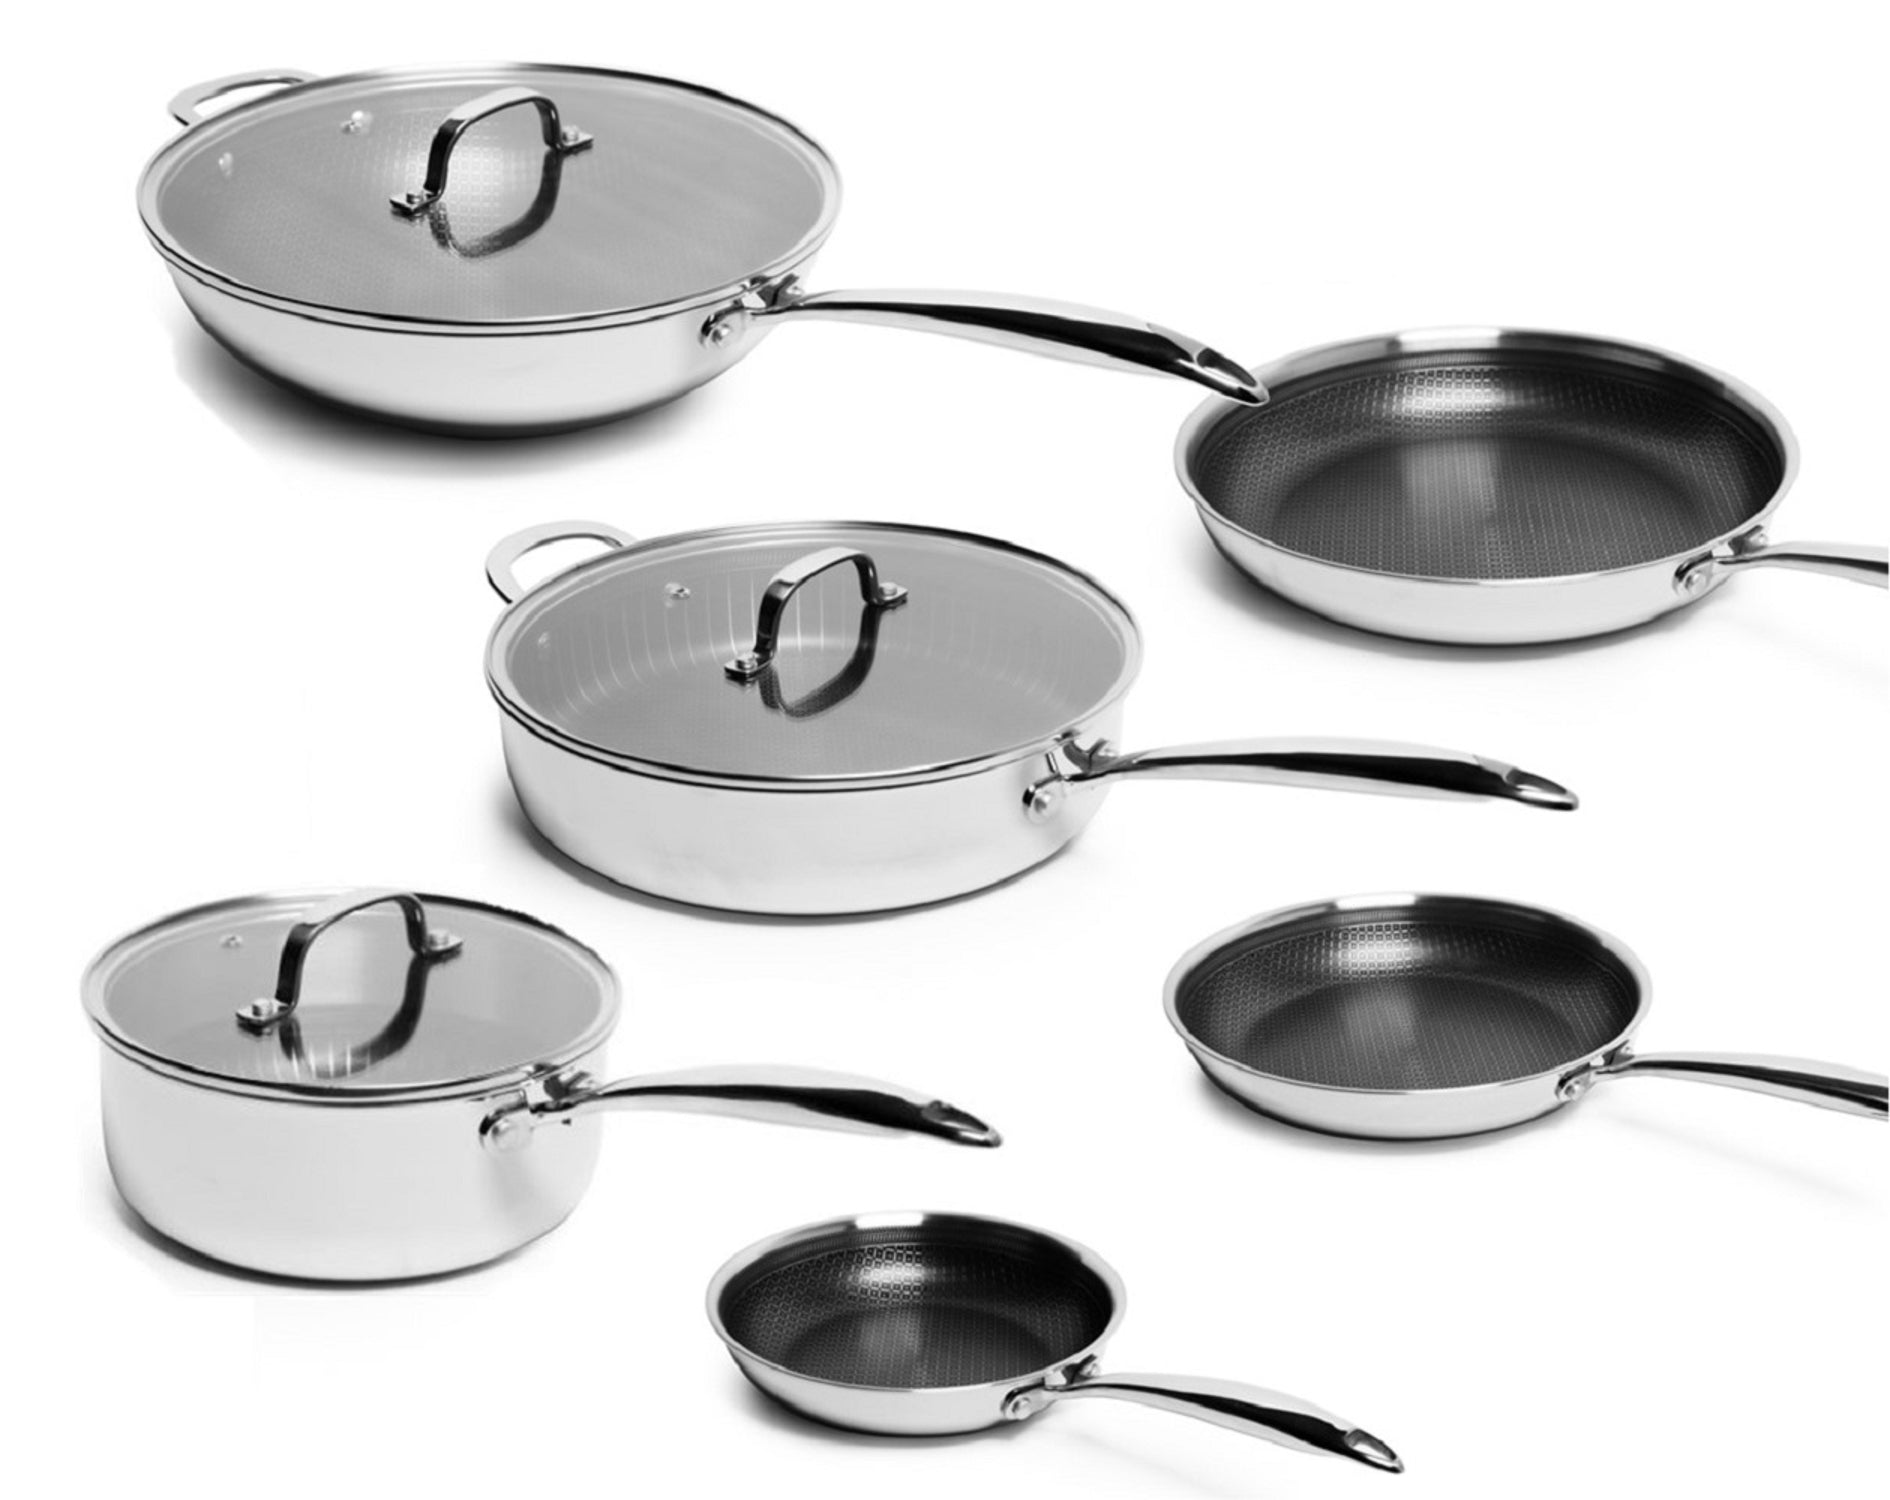 HexClad Hybrid Non-Stick Cookware, 7 Piece Set with Lids and Wok, Metal  Utensil Safe, Induction Ready & PFOA-Free, Non-Stick & Stainless Steal  Construction